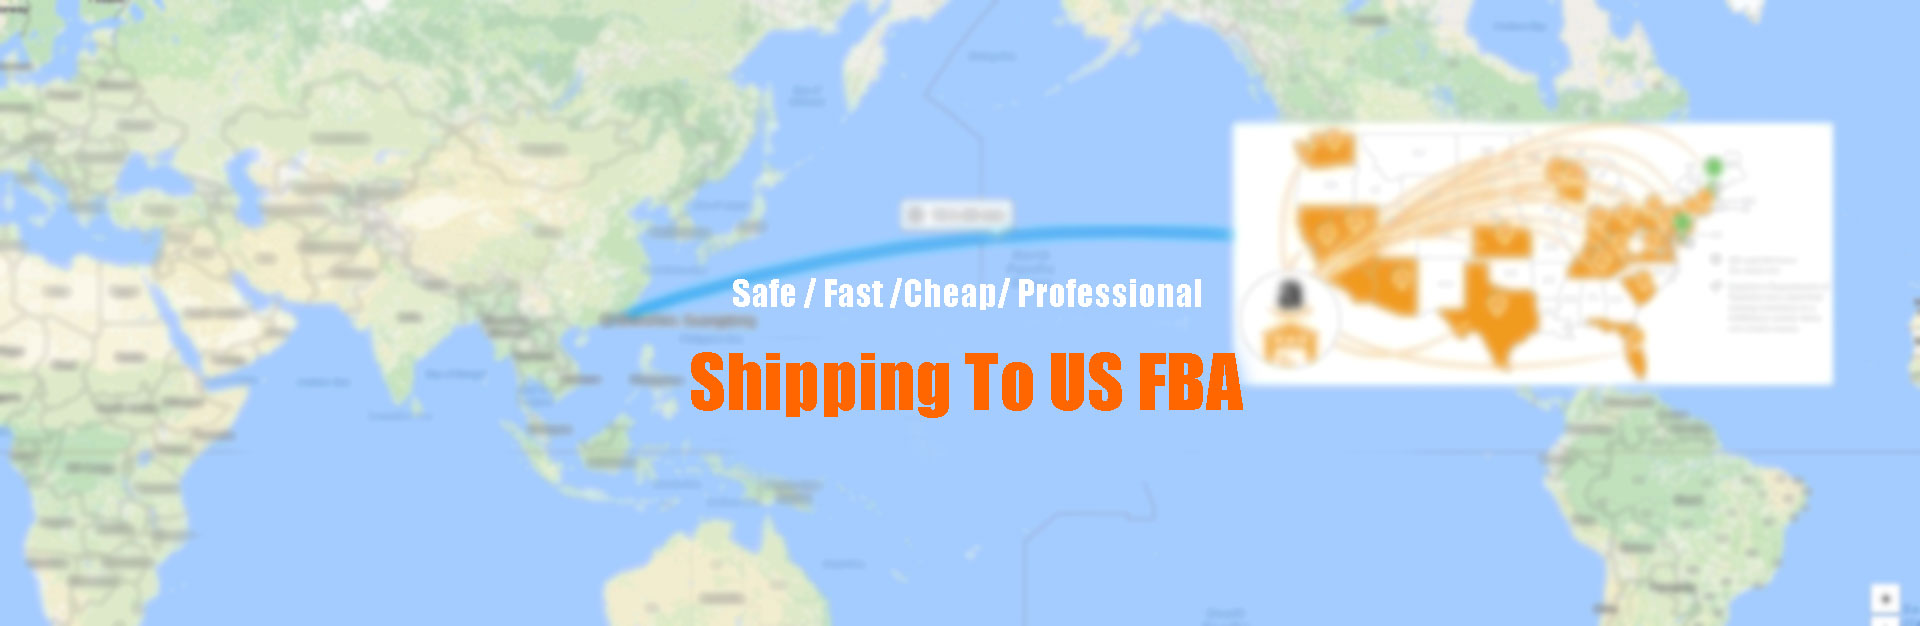 shipping to us fba